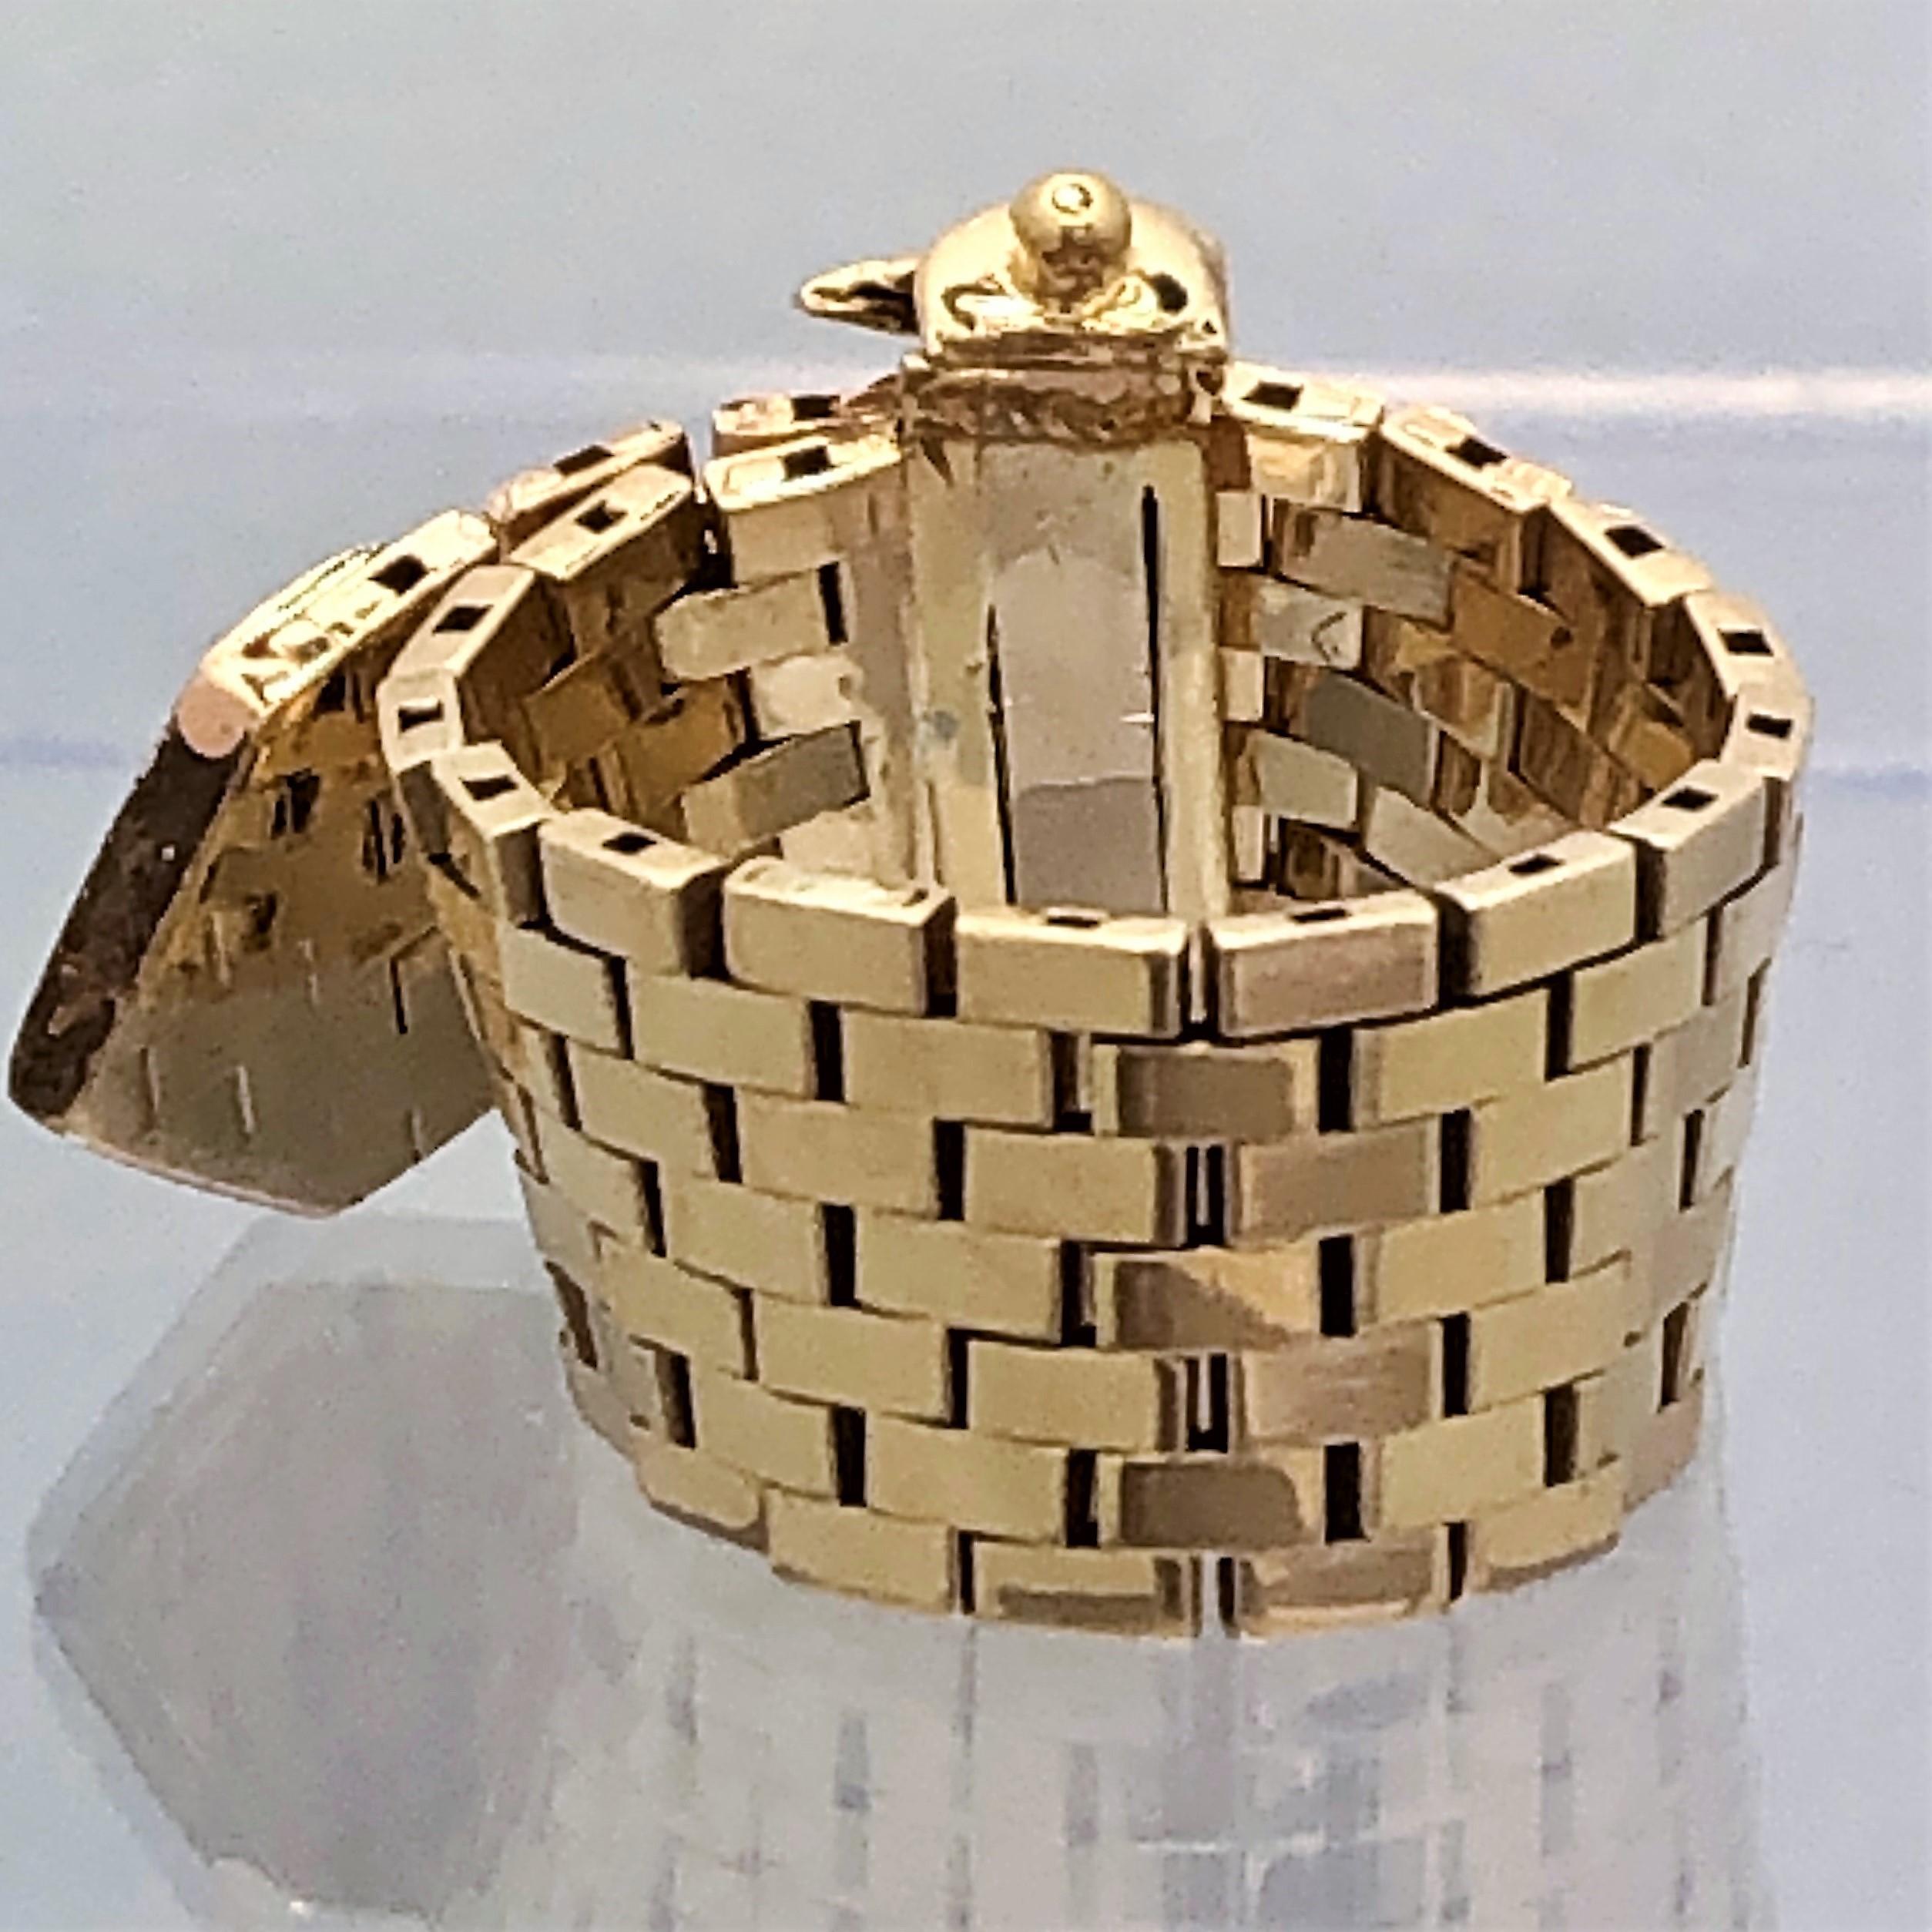 Made of 14K Yellow Gold, this Mid-Century brick style buckle ring is set with nineteen 
round brilliant cut diamonds weighing an approximate total of .15CT of overall F/G Color 
and VS2 Clarity. Measures just under 3 inches long (2 15/16 inches) by